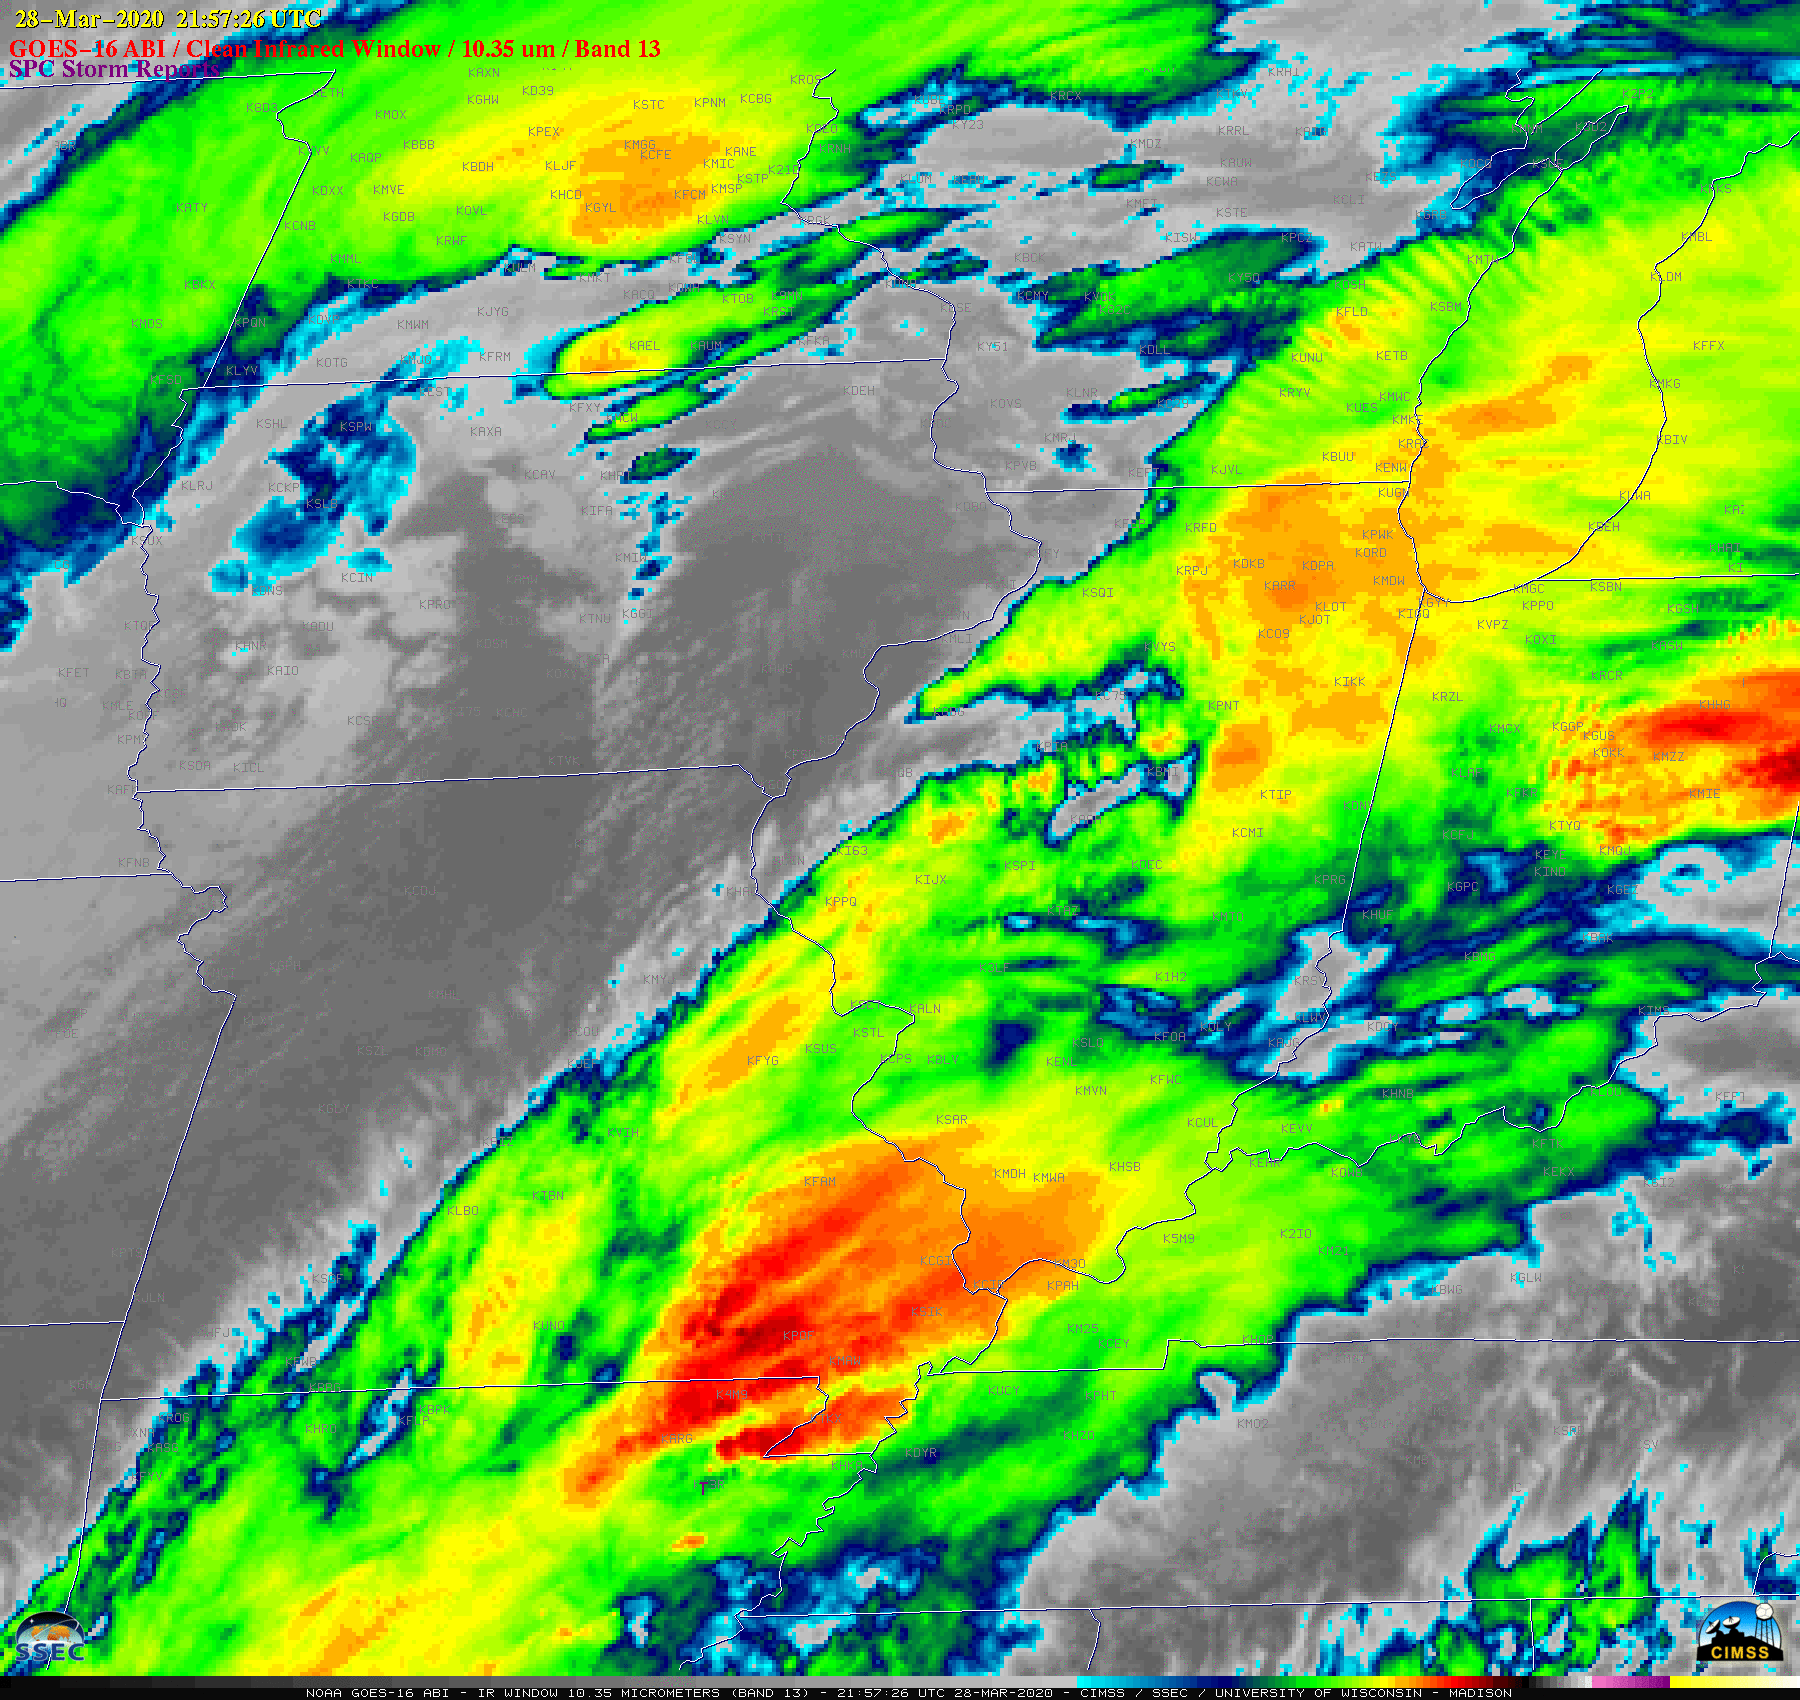 GOES- 16 "Clean" Infrared Window (10.35 µm) images, with time-matched SPC Storm Reports plotted in purple [click to play animation | MP4]